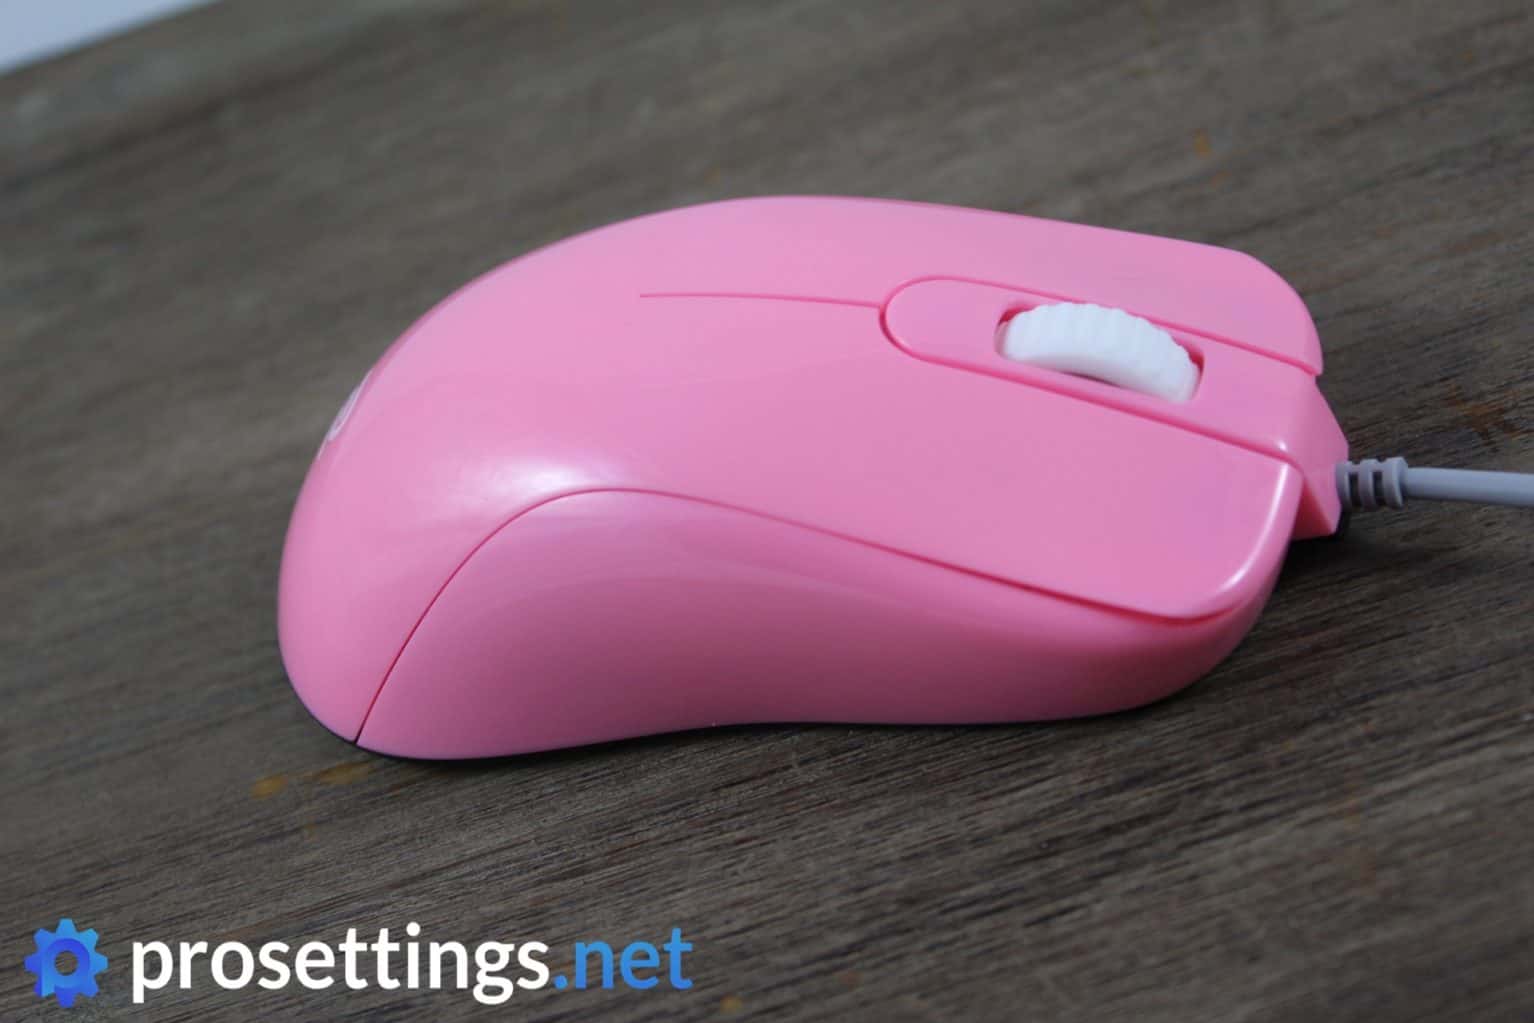 Zowie S2 Divina Mouse Review 